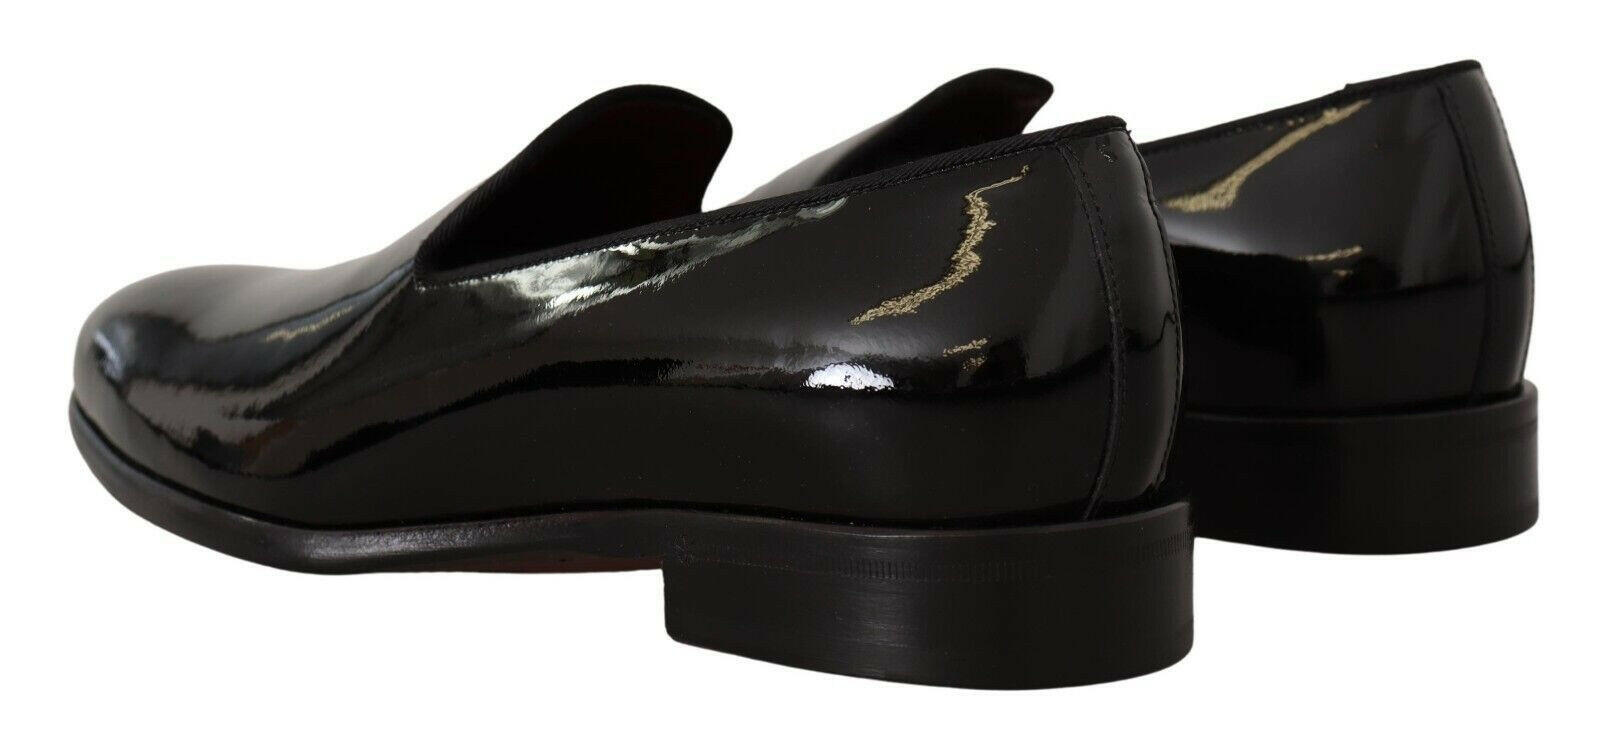 Dolce & Gabbana Black Patent Leather Formal Loafers Dress Shoes - GENUINE AUTHENTIC BRAND LLC  